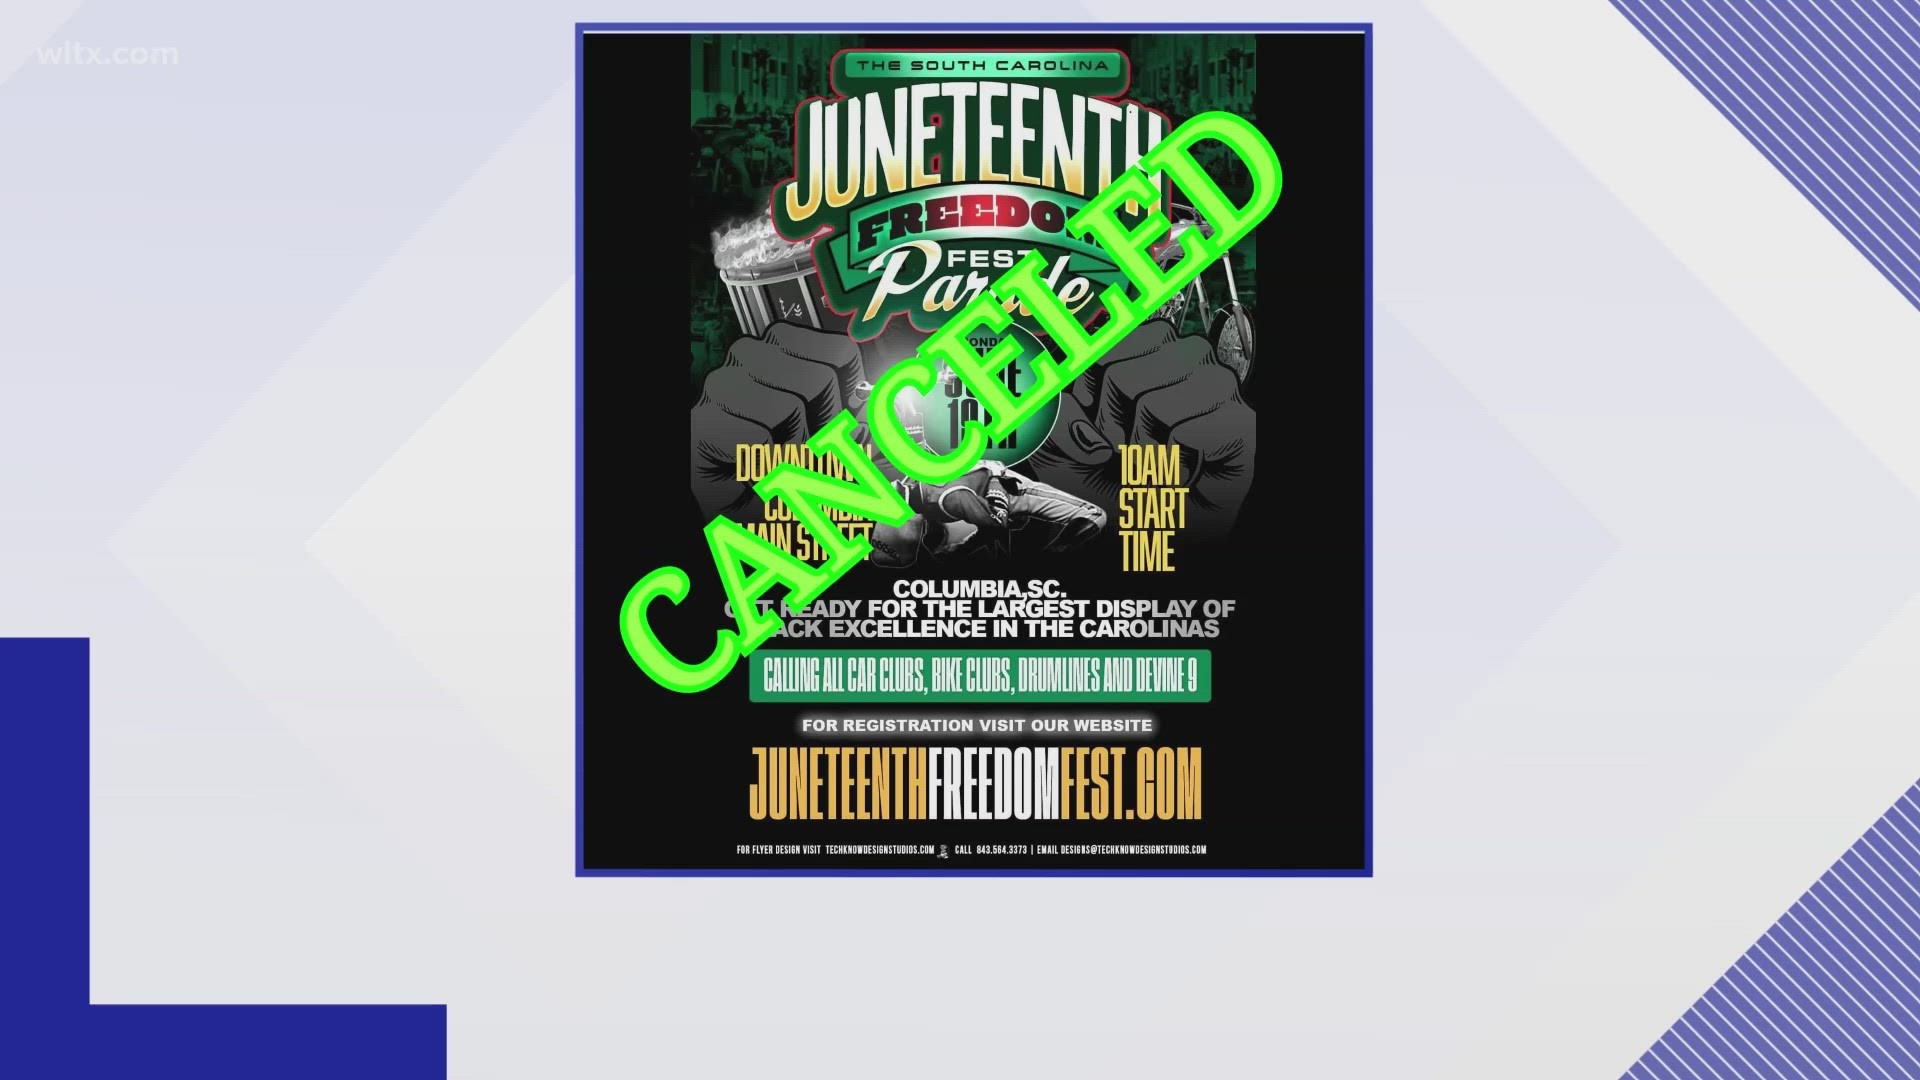 Inclement weather forces cancellation of Columbia's Juneteenth parade, but organizers urge residents to participate in other events.